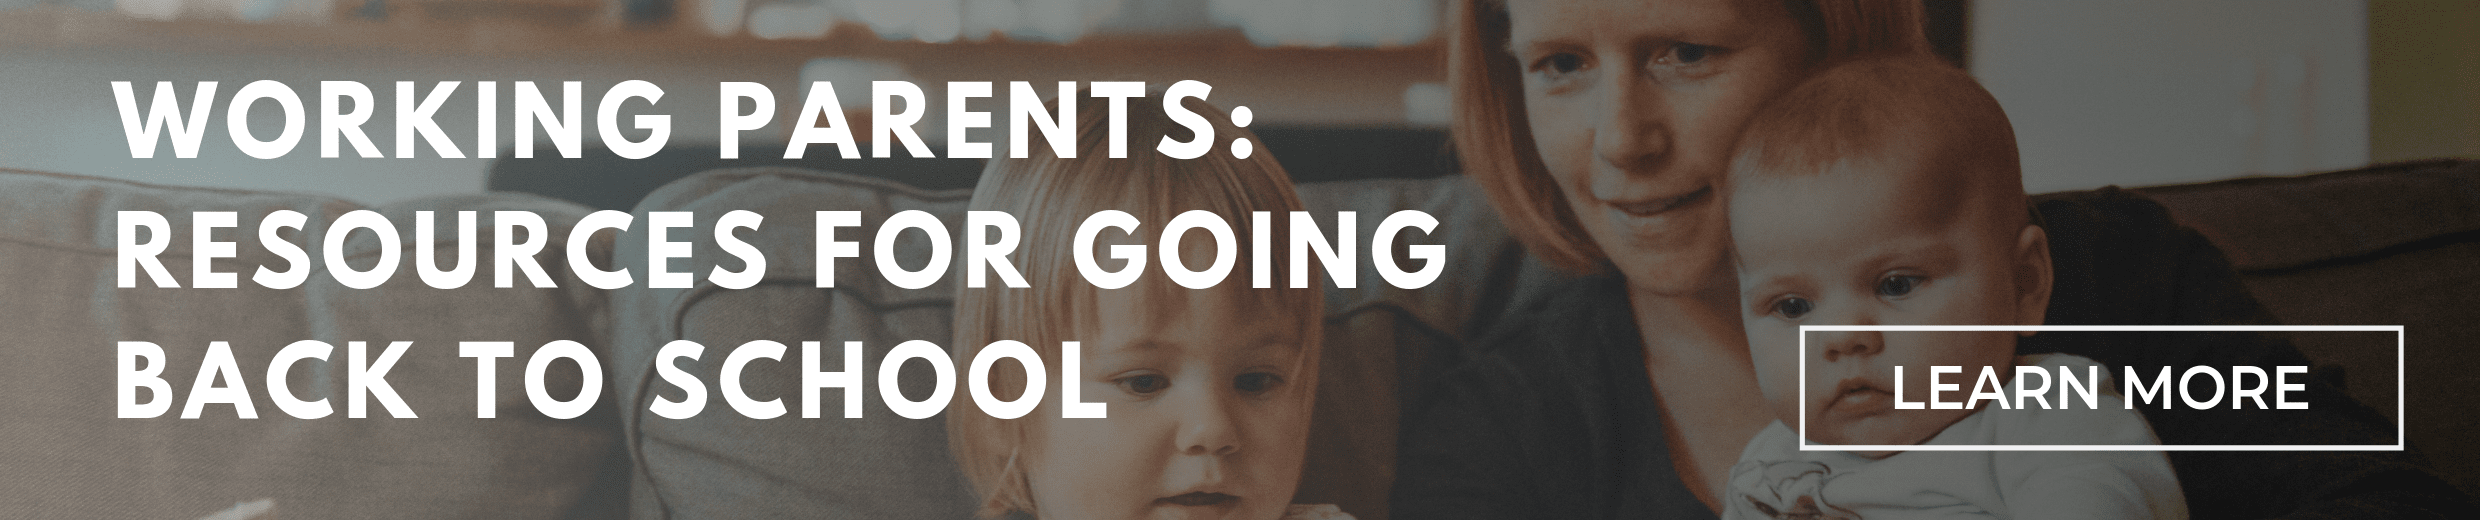 Resources for Working Parents Going Back to School